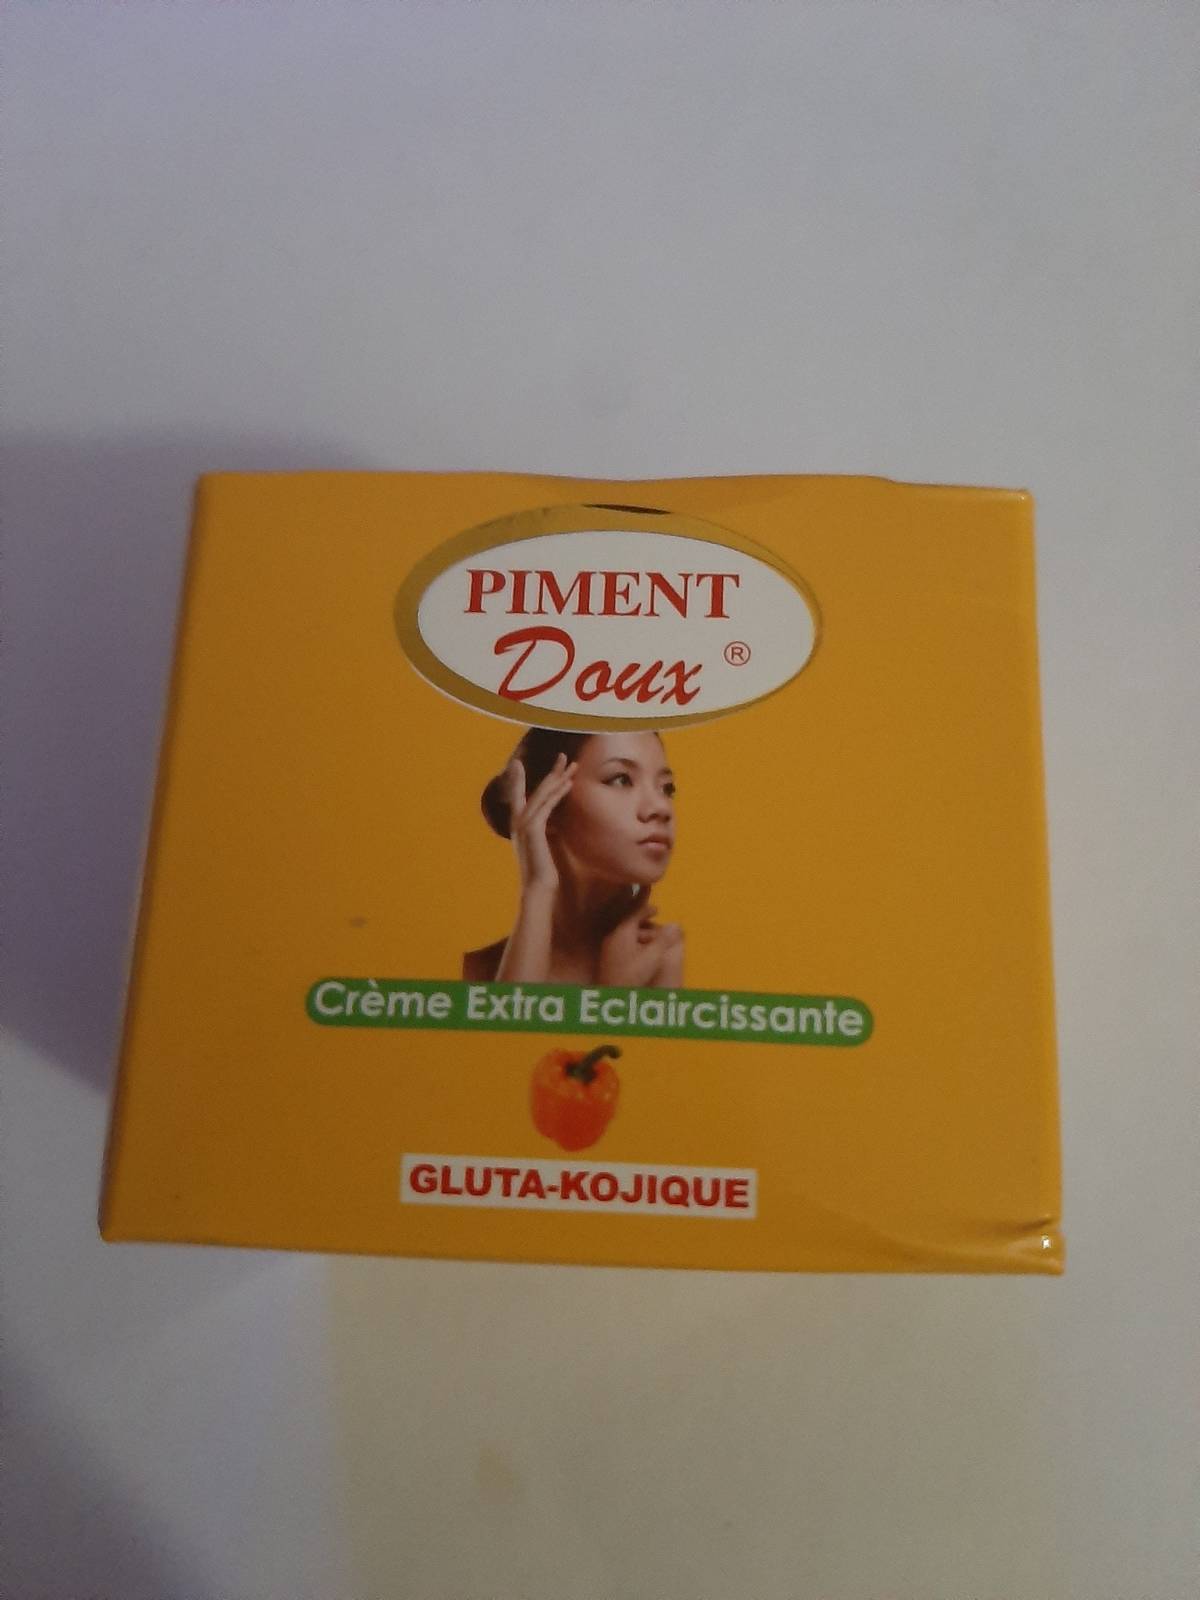 Piment doux extra whitening face cream